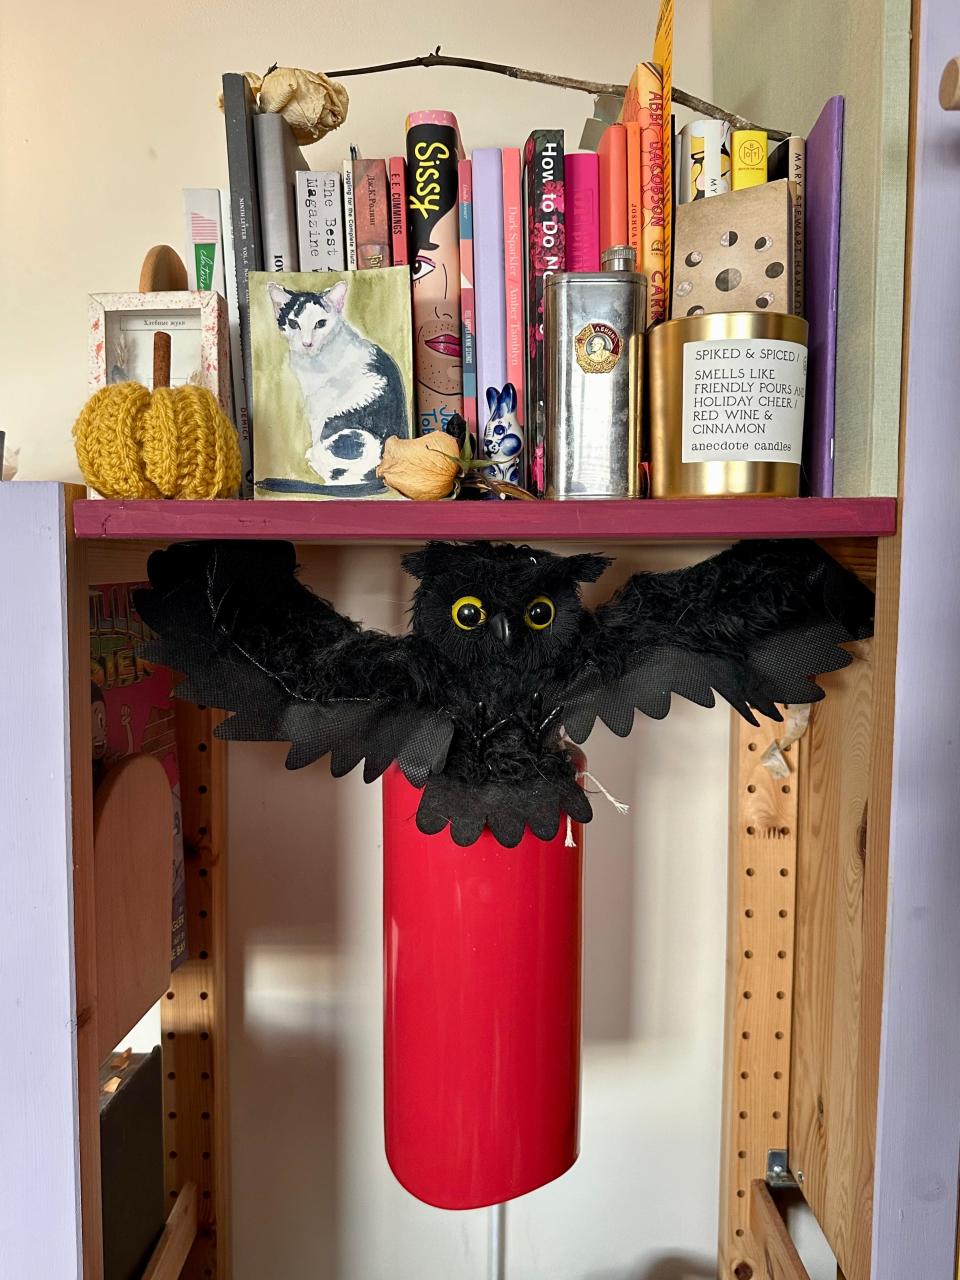 Halloween decorations including a black winged creature and a crocheted pumpkin